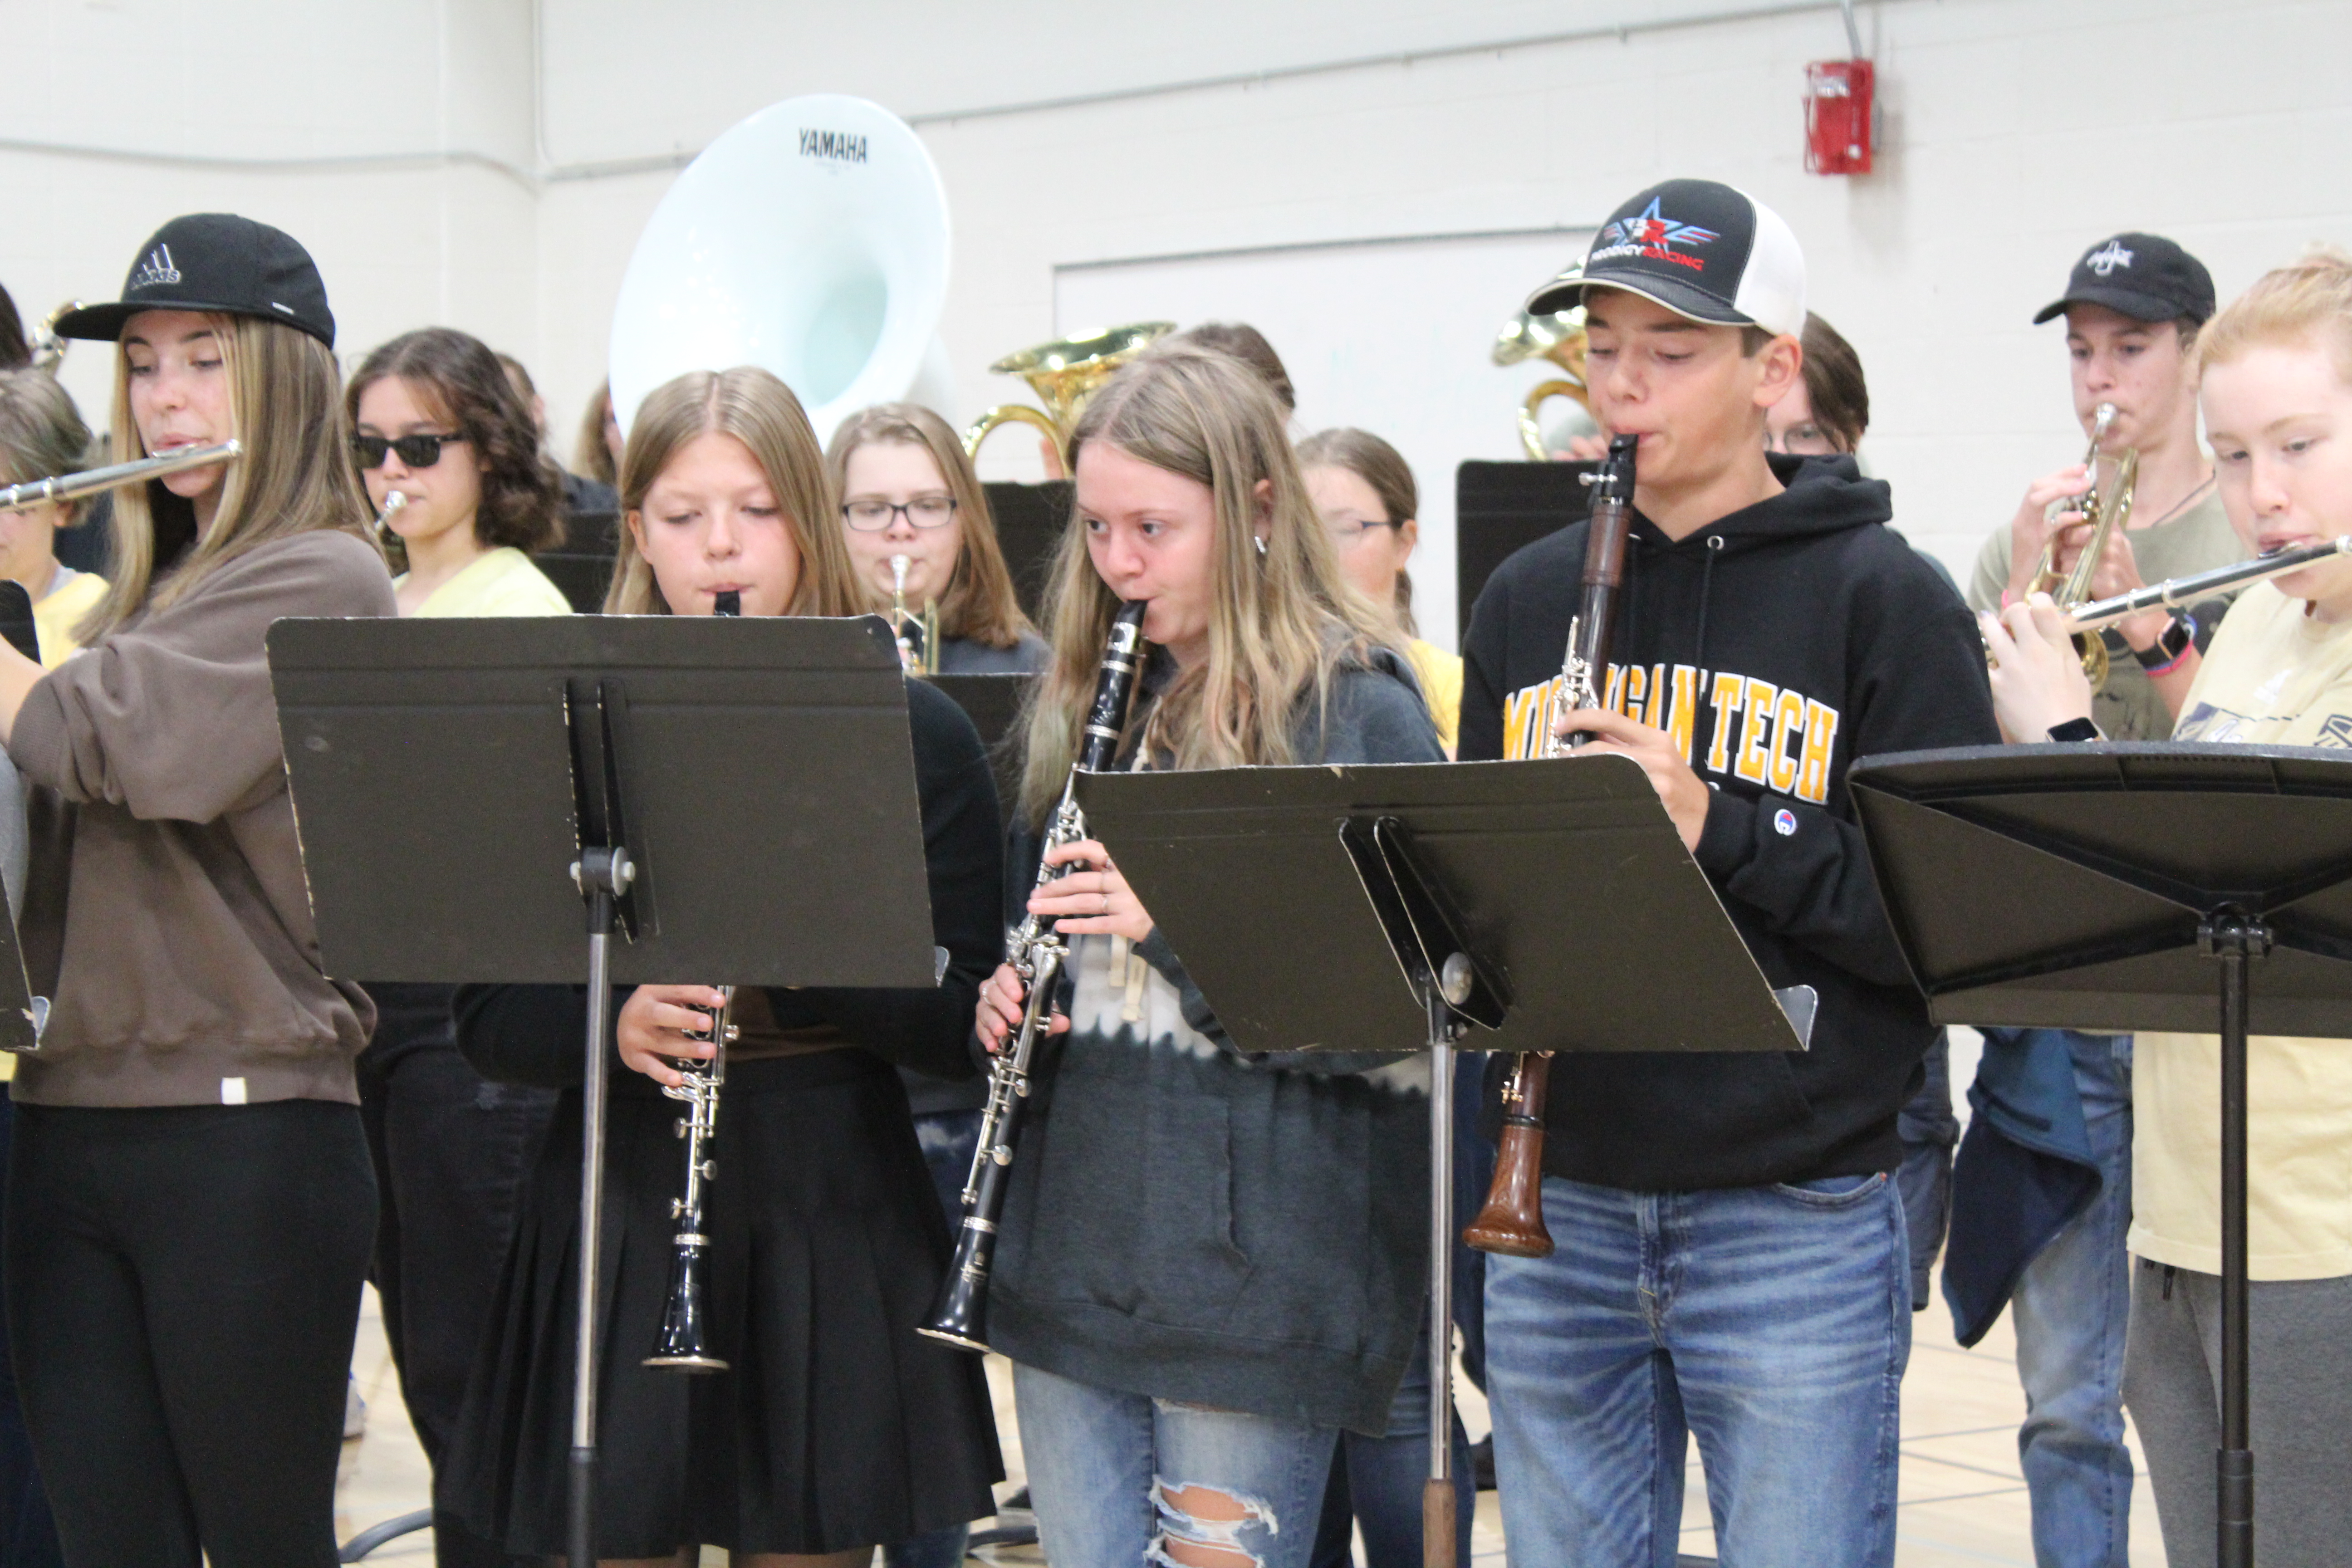 Image: St. Francis High School Band